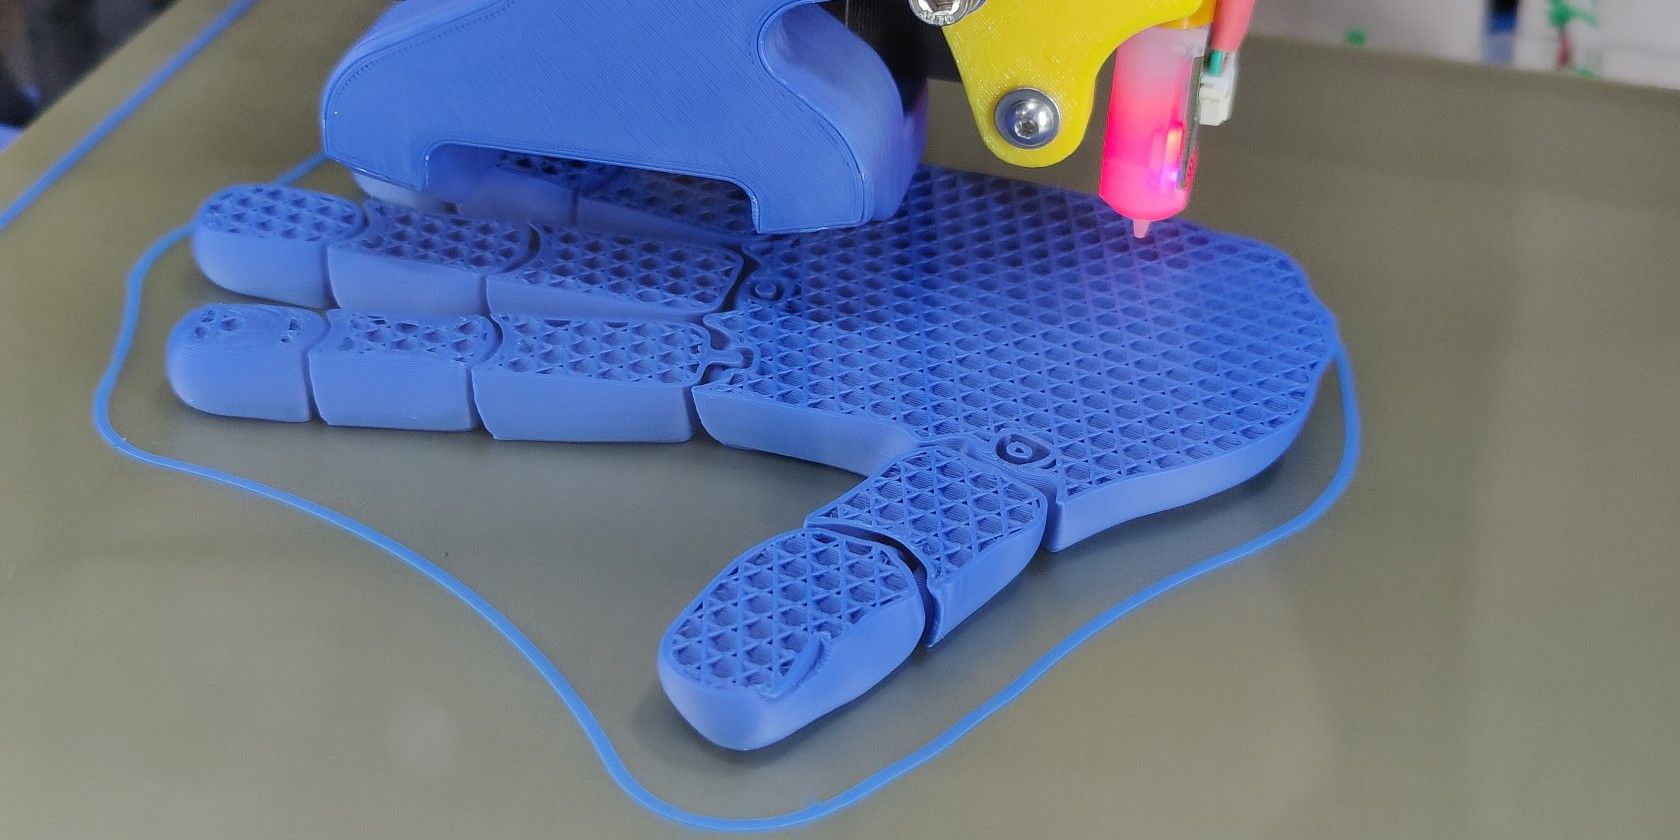 print quality - What is causing 'droplets' on first layer? - 3D Printing  Stack Exchange